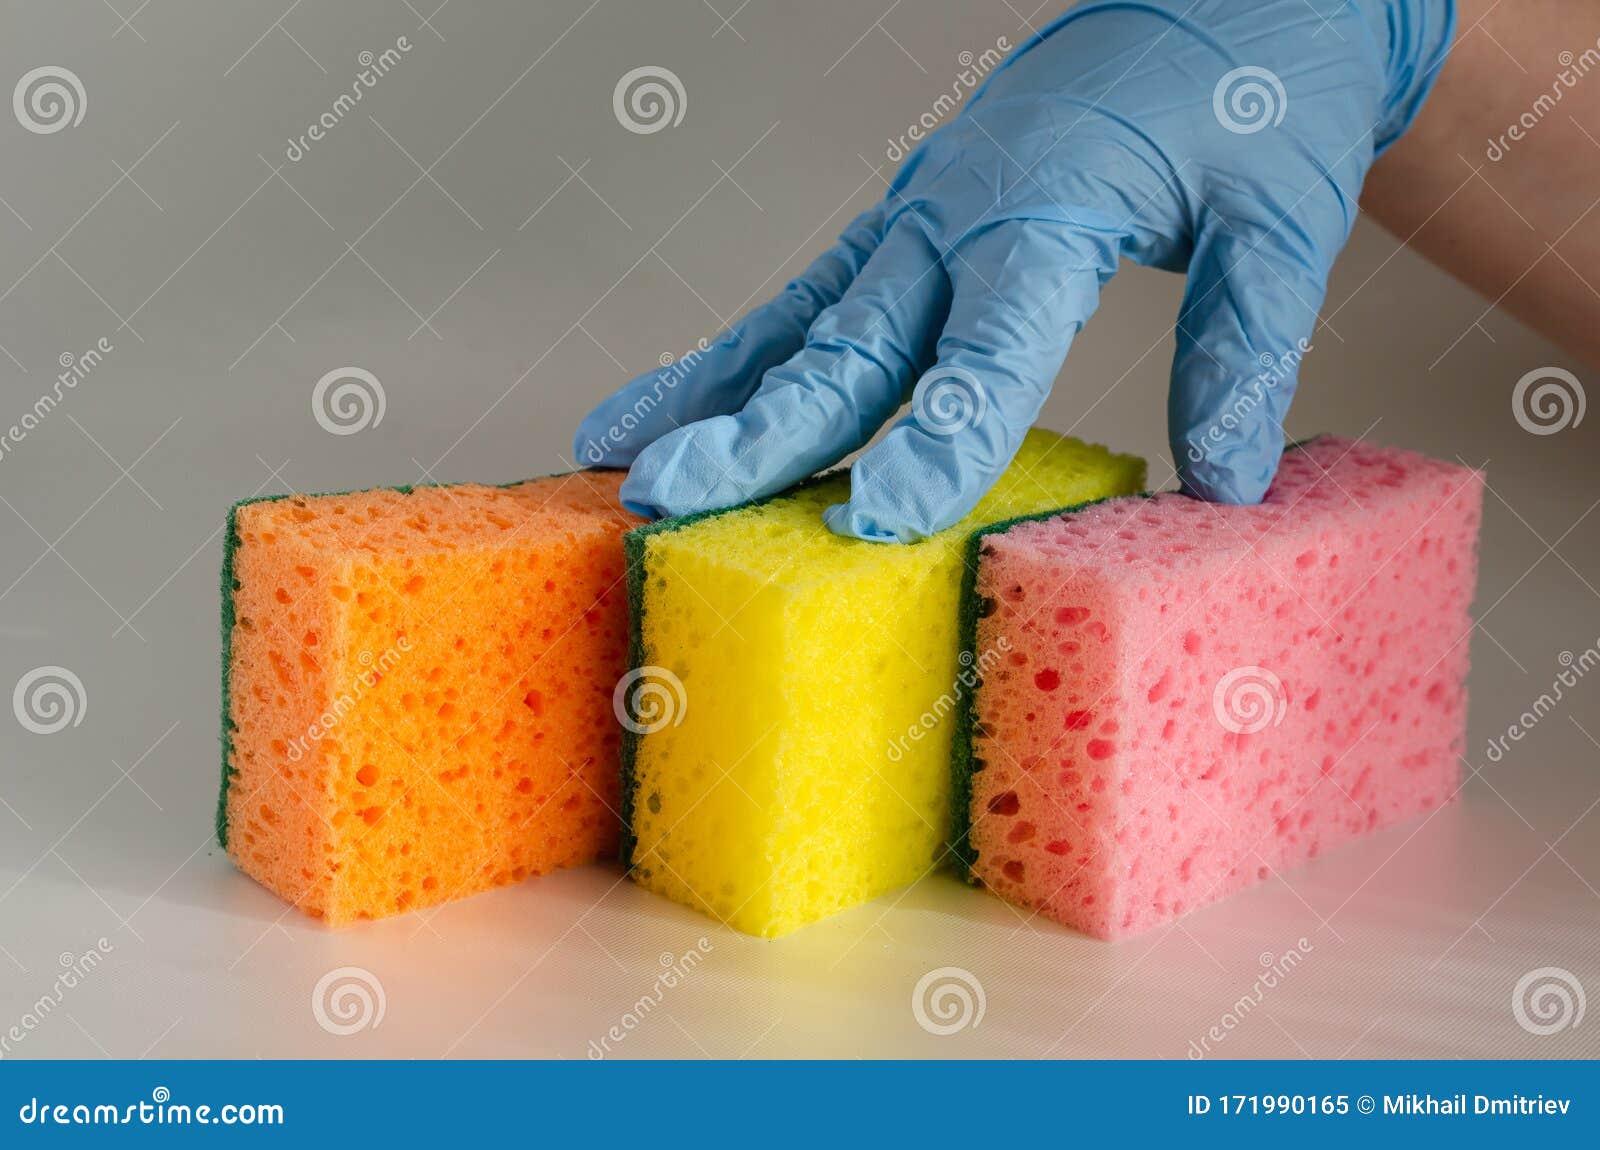 https://thumbs.dreamstime.com/z/three-multi-colored-kitchen-sponges-table-fingers-protective-glove-press-new-to-commercial-cleaning-company-home-171990165.jpg